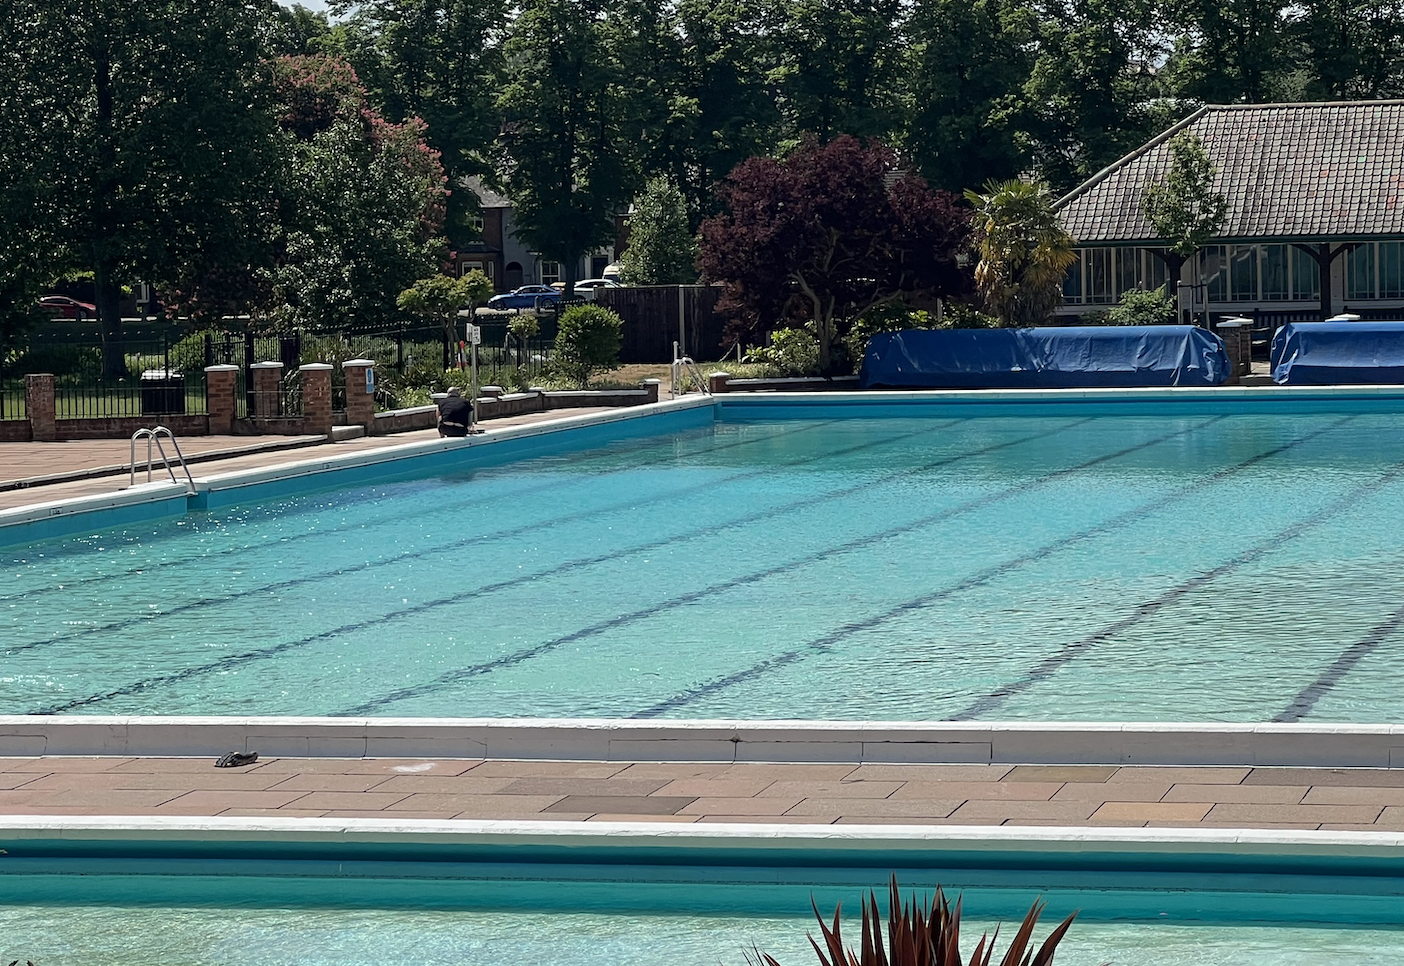 Hitchin outdoor pool is set to reopen soon - find out more. CREDIT: @HitchinNubNews 